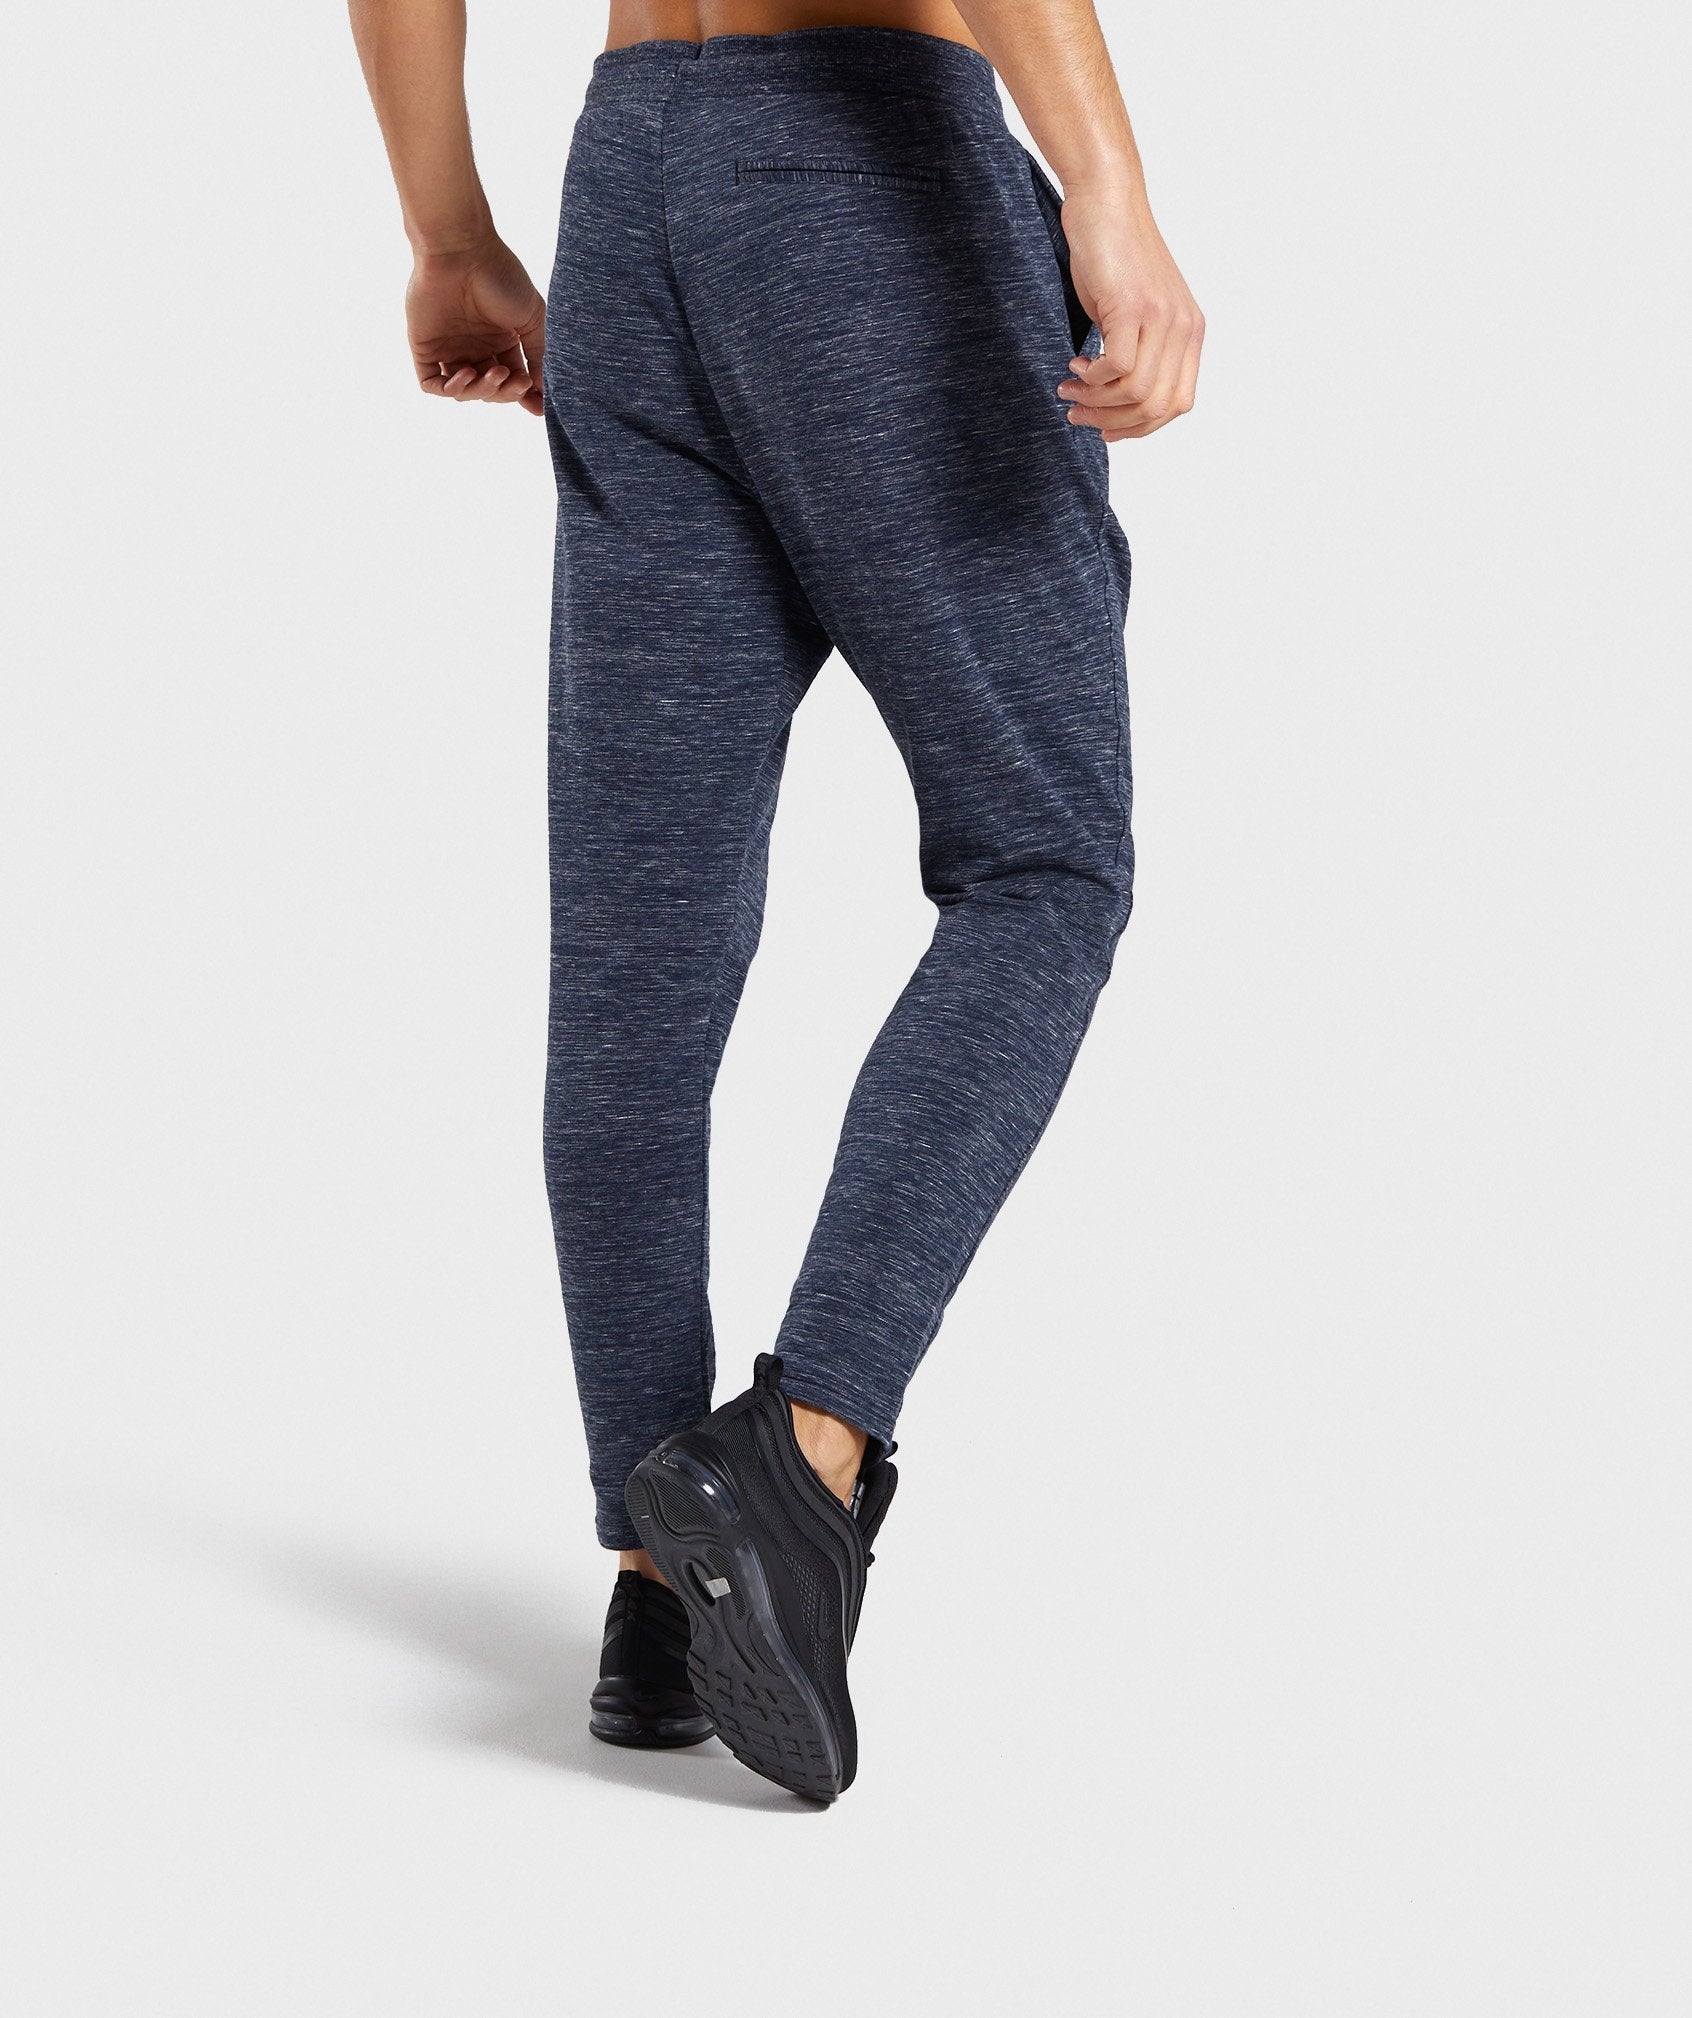 Lounge Joggers in Navy Marl - view 2